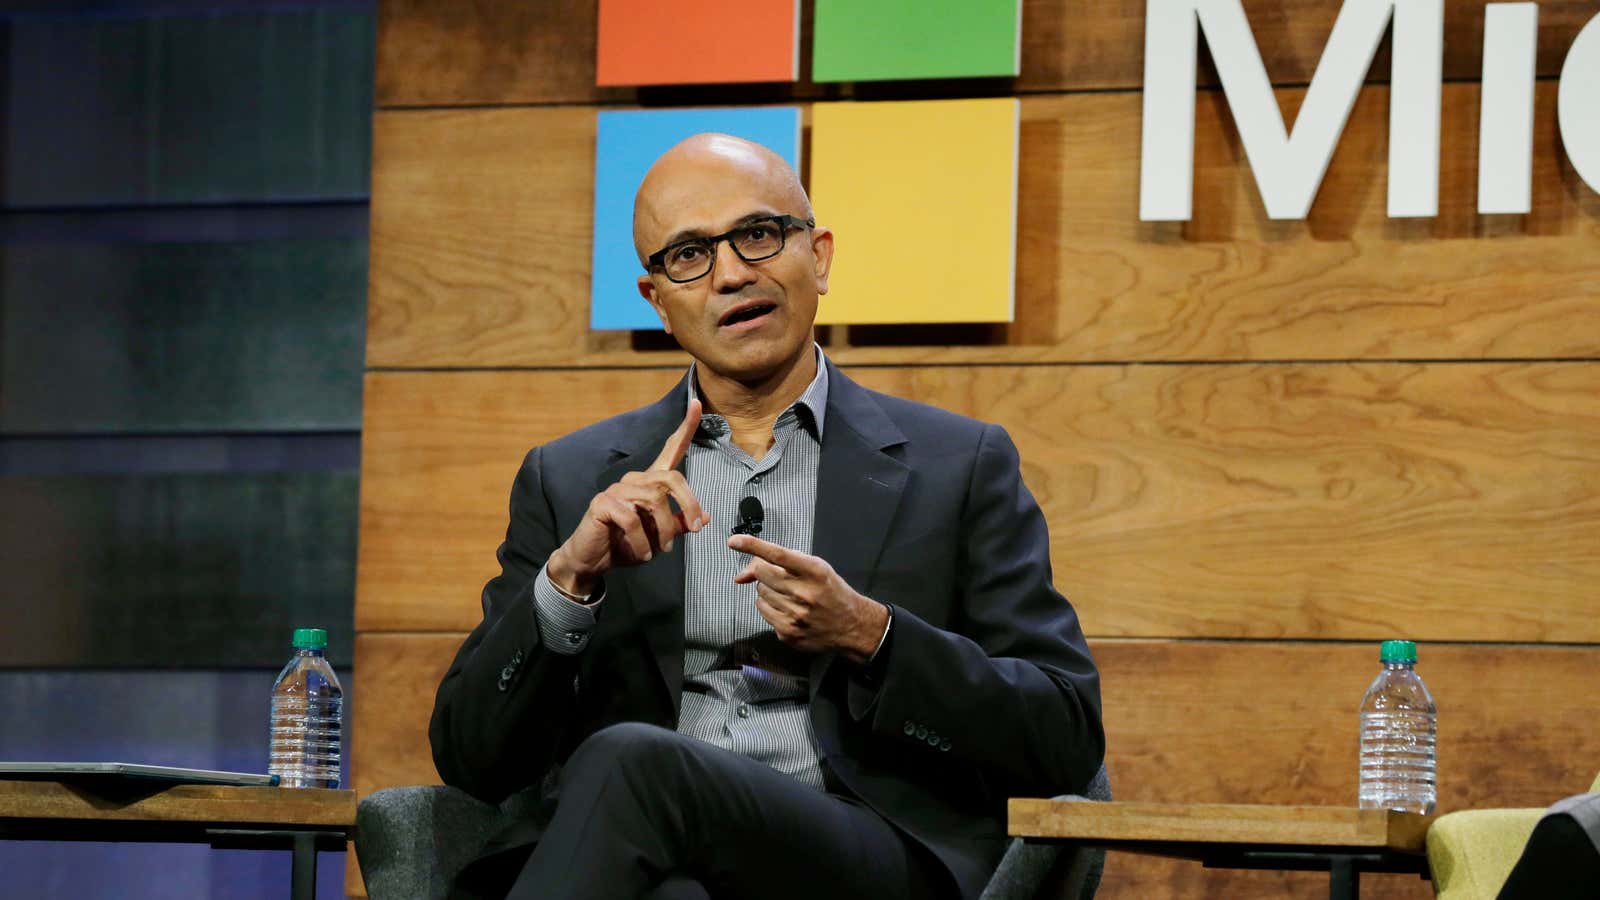 Satya Nadella, potentially in the middle of a list.